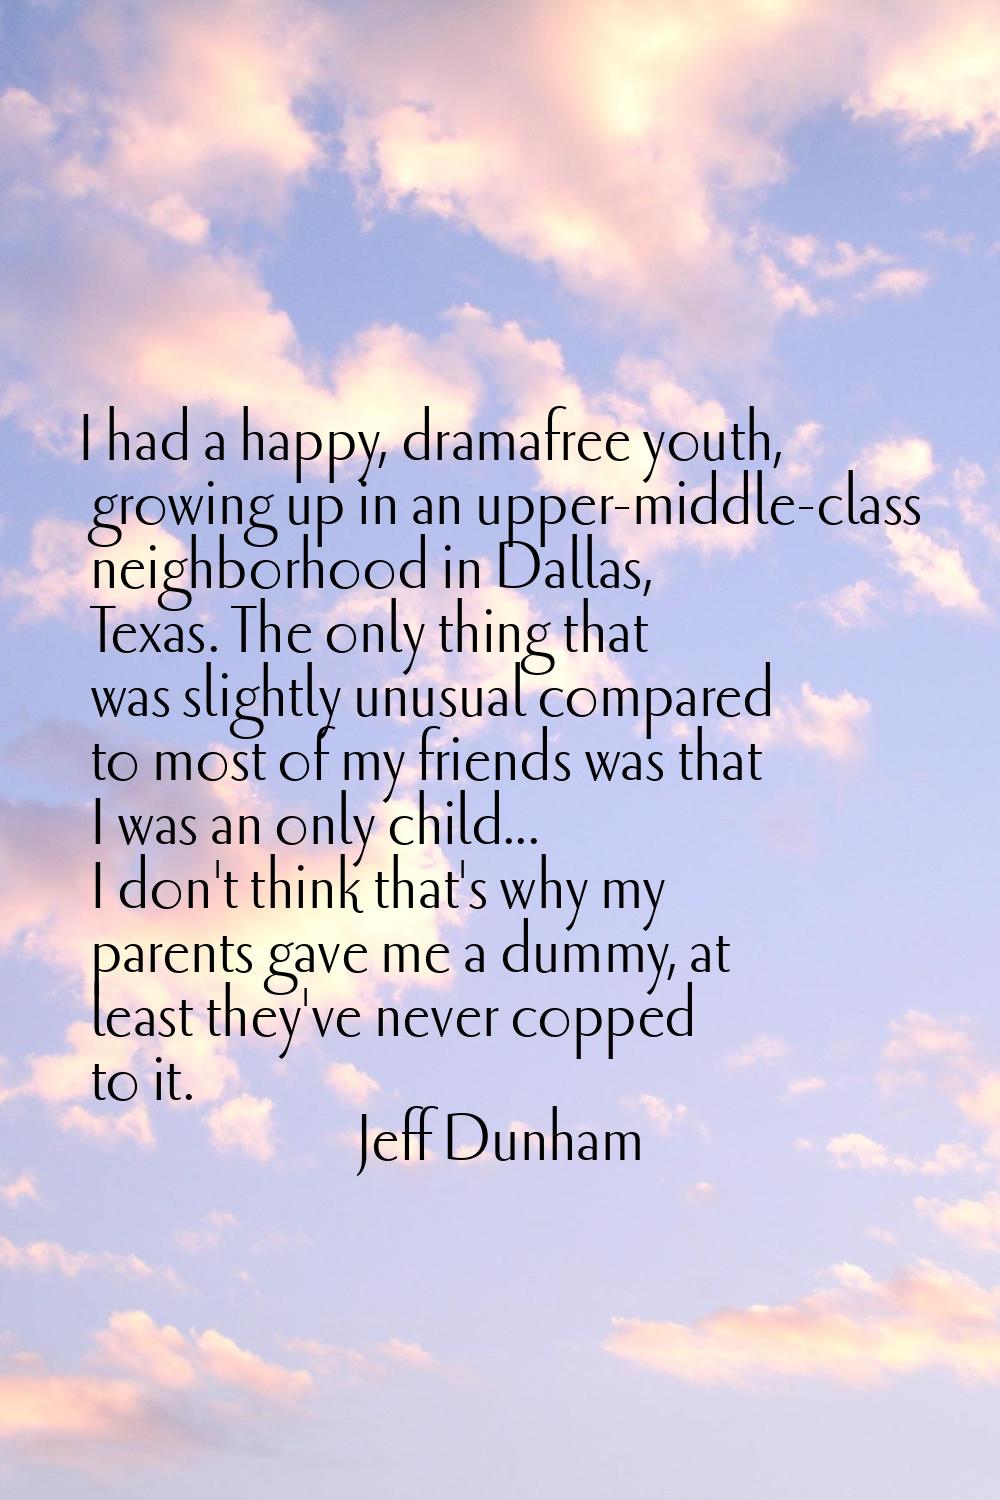 I had a happy, dramafree youth, growing up in an upper-middle-class neighborhood in Dallas, Texas. 